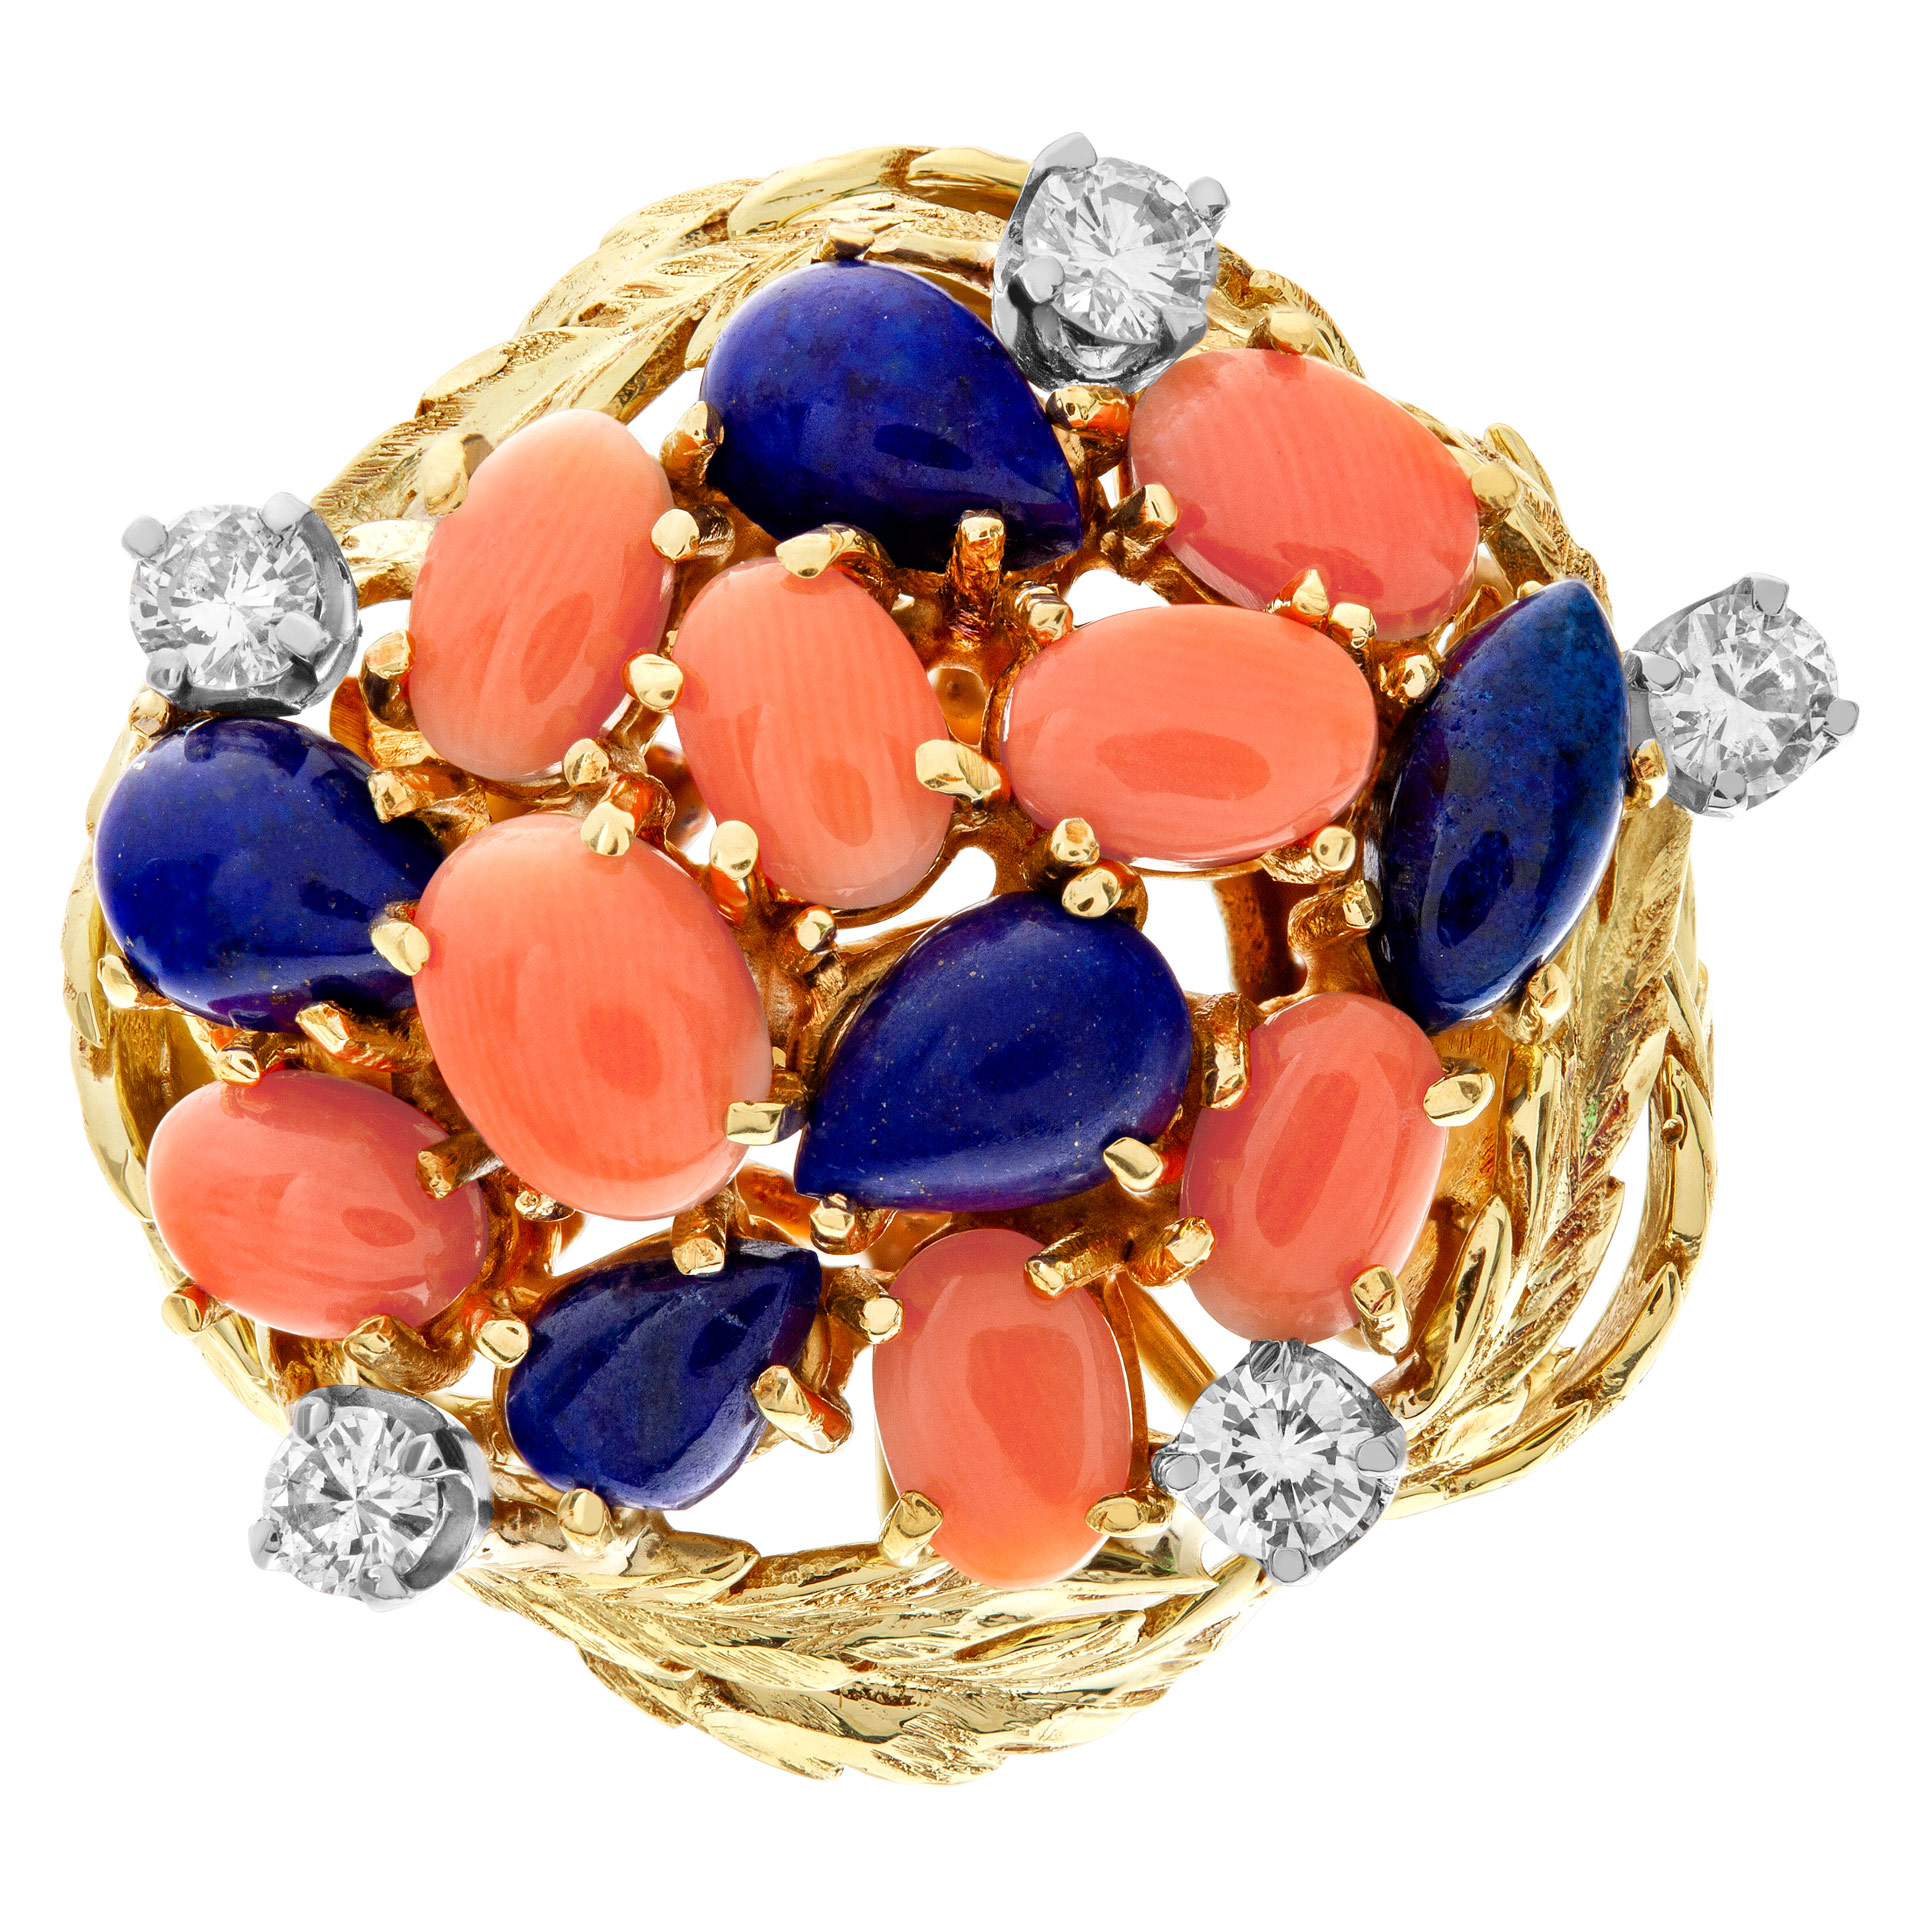 Lapiz lazuli & coral garden ring in 18k yellow gold with diamond accents